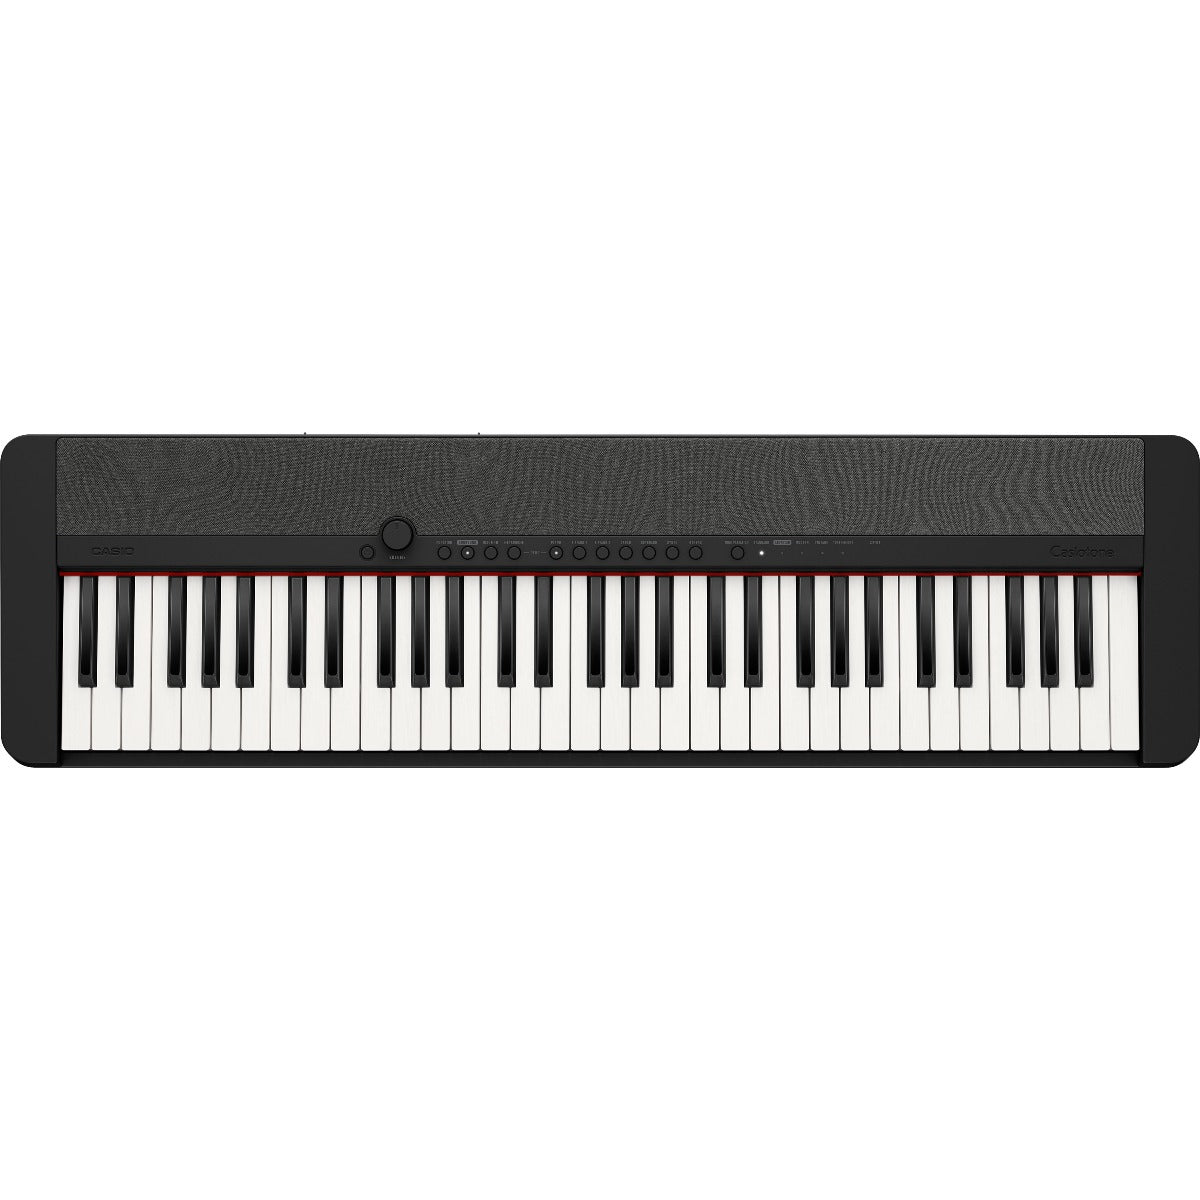 Top view of Casio Casiotone CT-S1 Portable Keyboard - Black